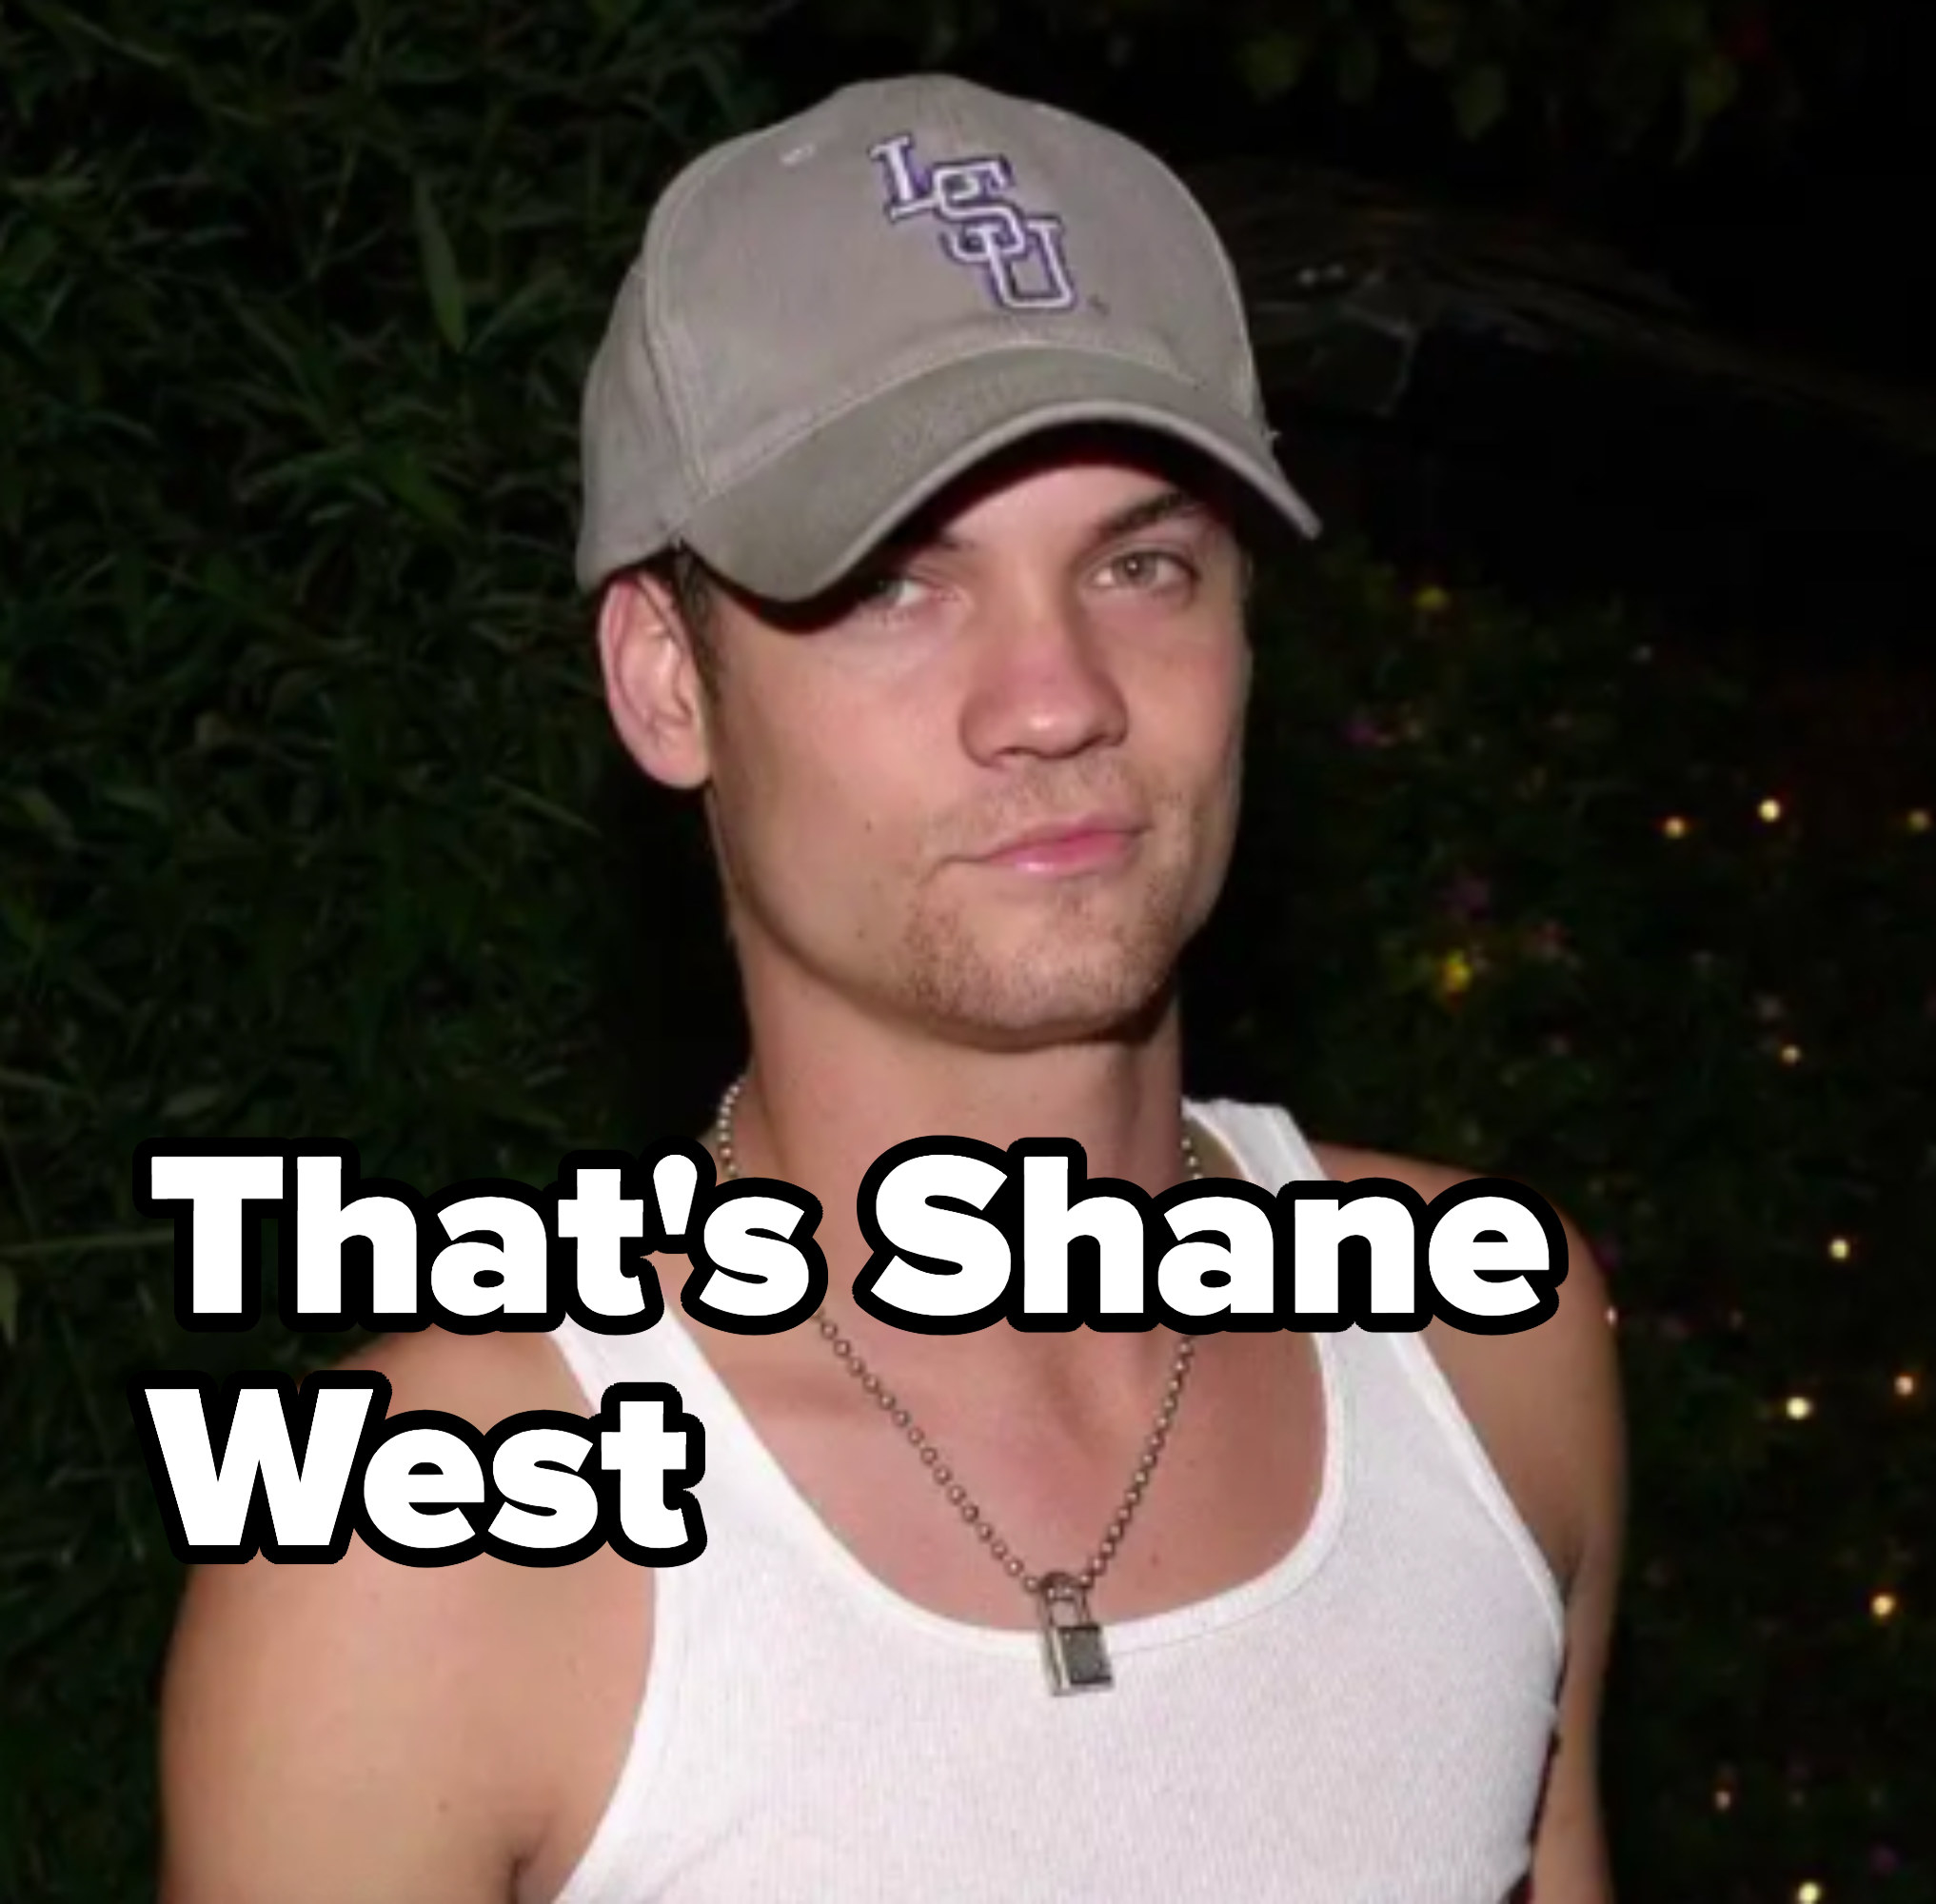 Shane west in a tank and a hat